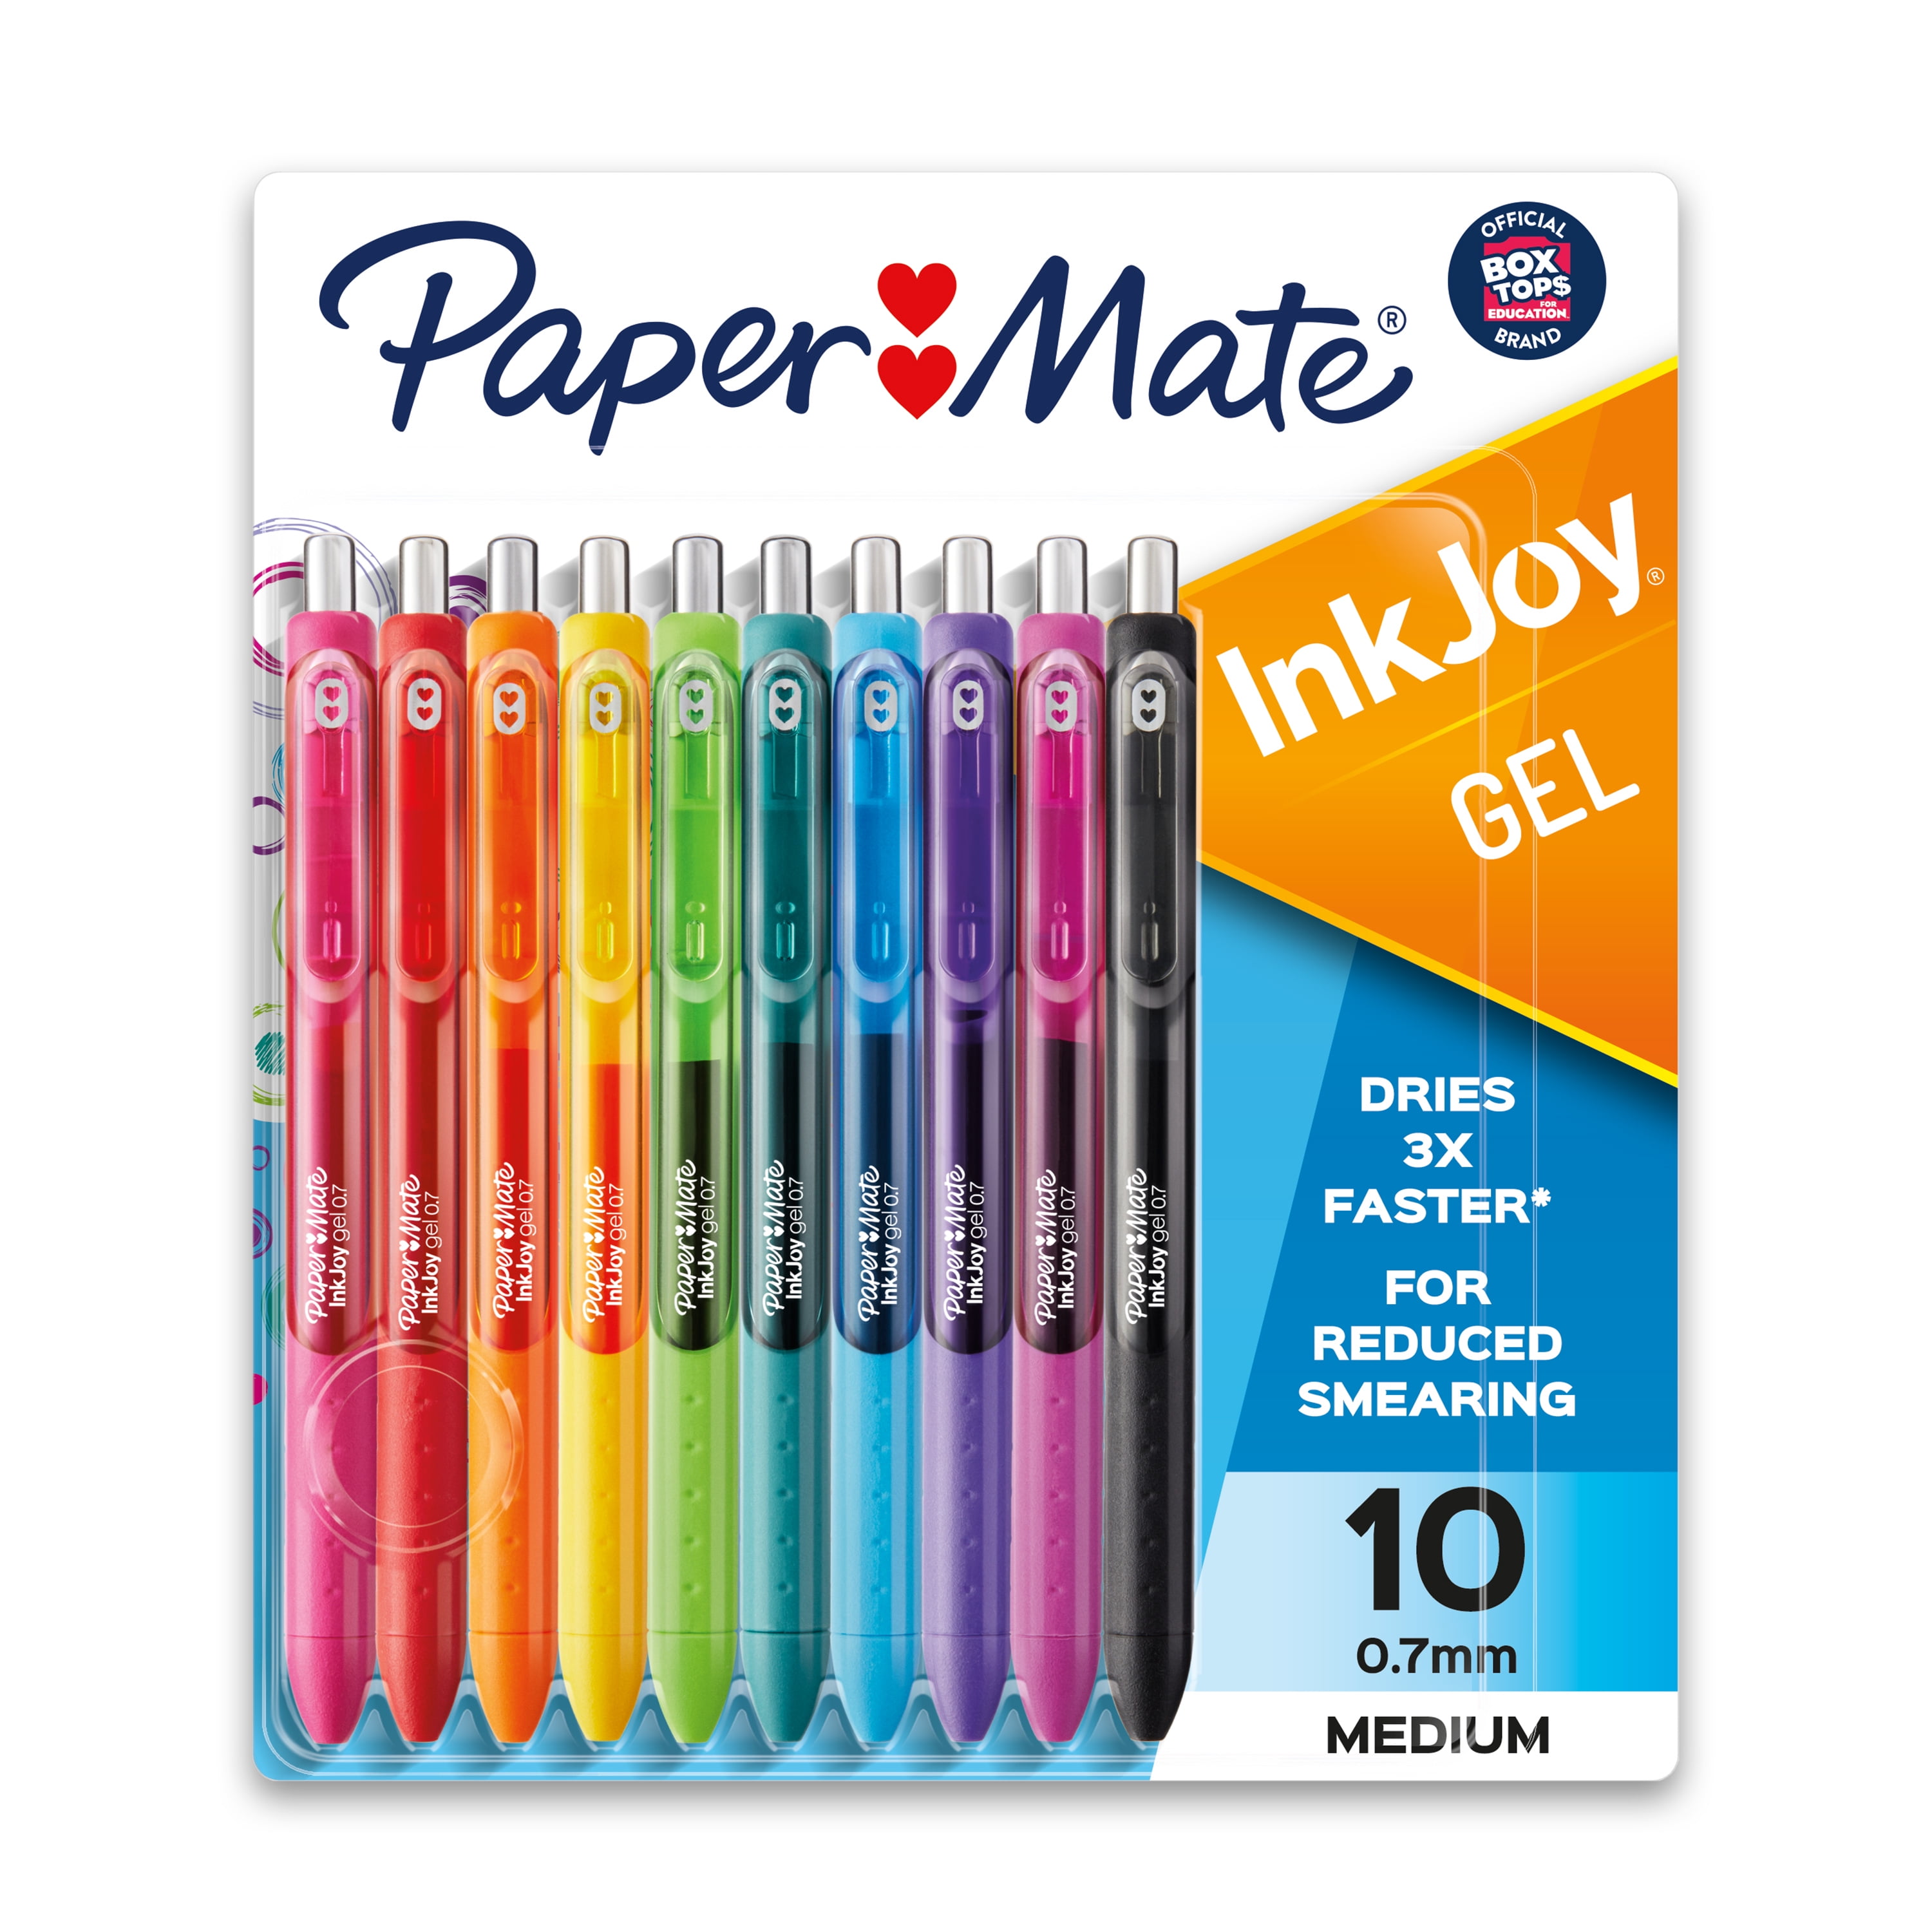 20 x Papermate Ink Point Rollerball Free Ink Pens Green 0.5mm Metal Tip FINE 